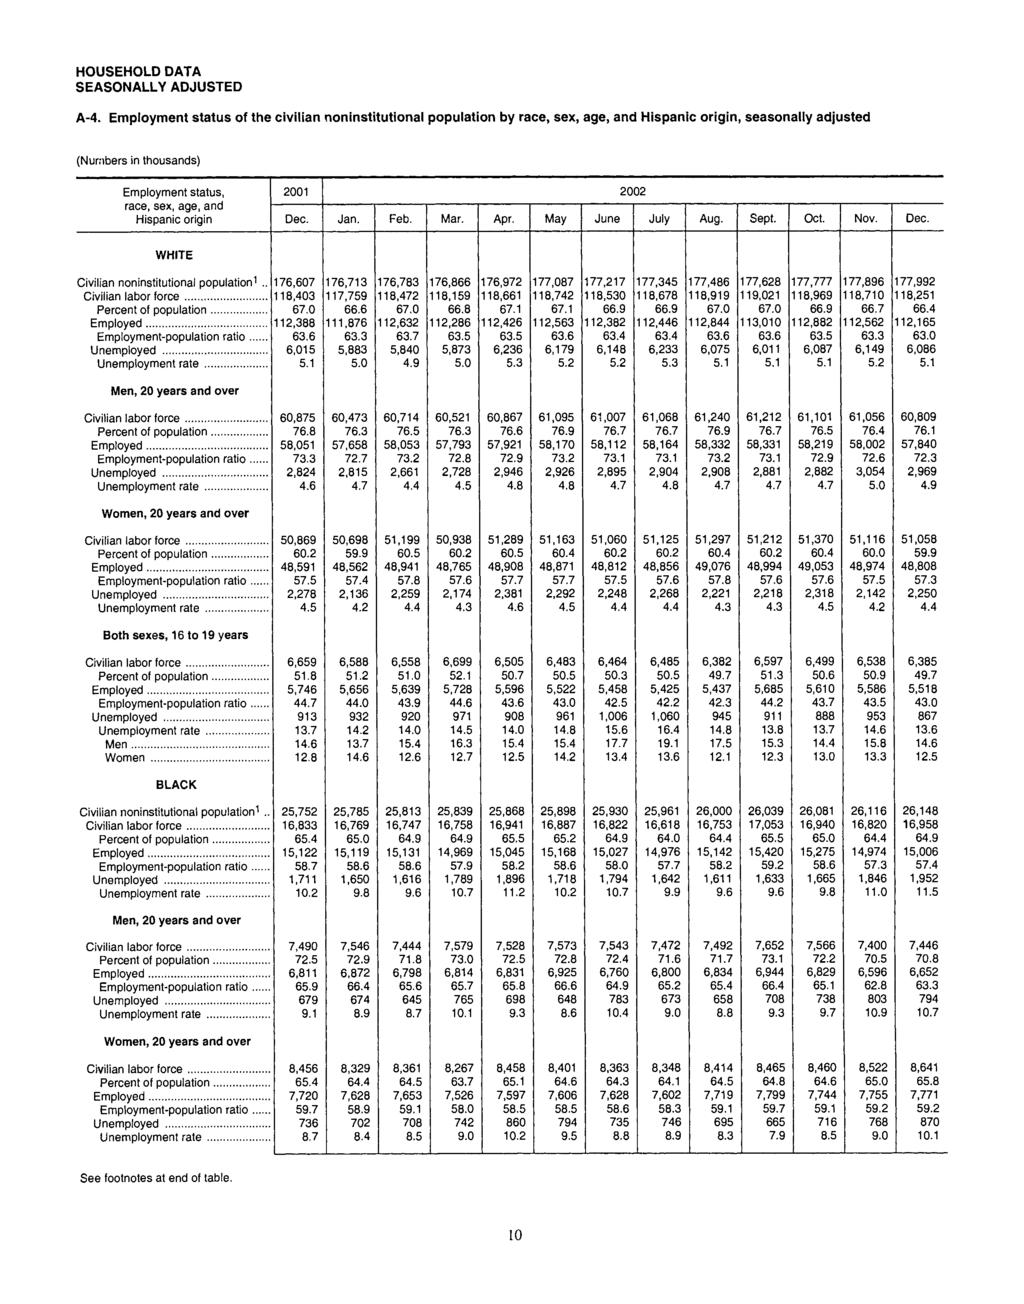 (Numbers in thousands) Employment status, race, sex, age, and Hispanic origin Jan. Feb. Mar. Apr. May June July Aug. Sept. Oct. WHITE Civilian noninstitutional population 1.